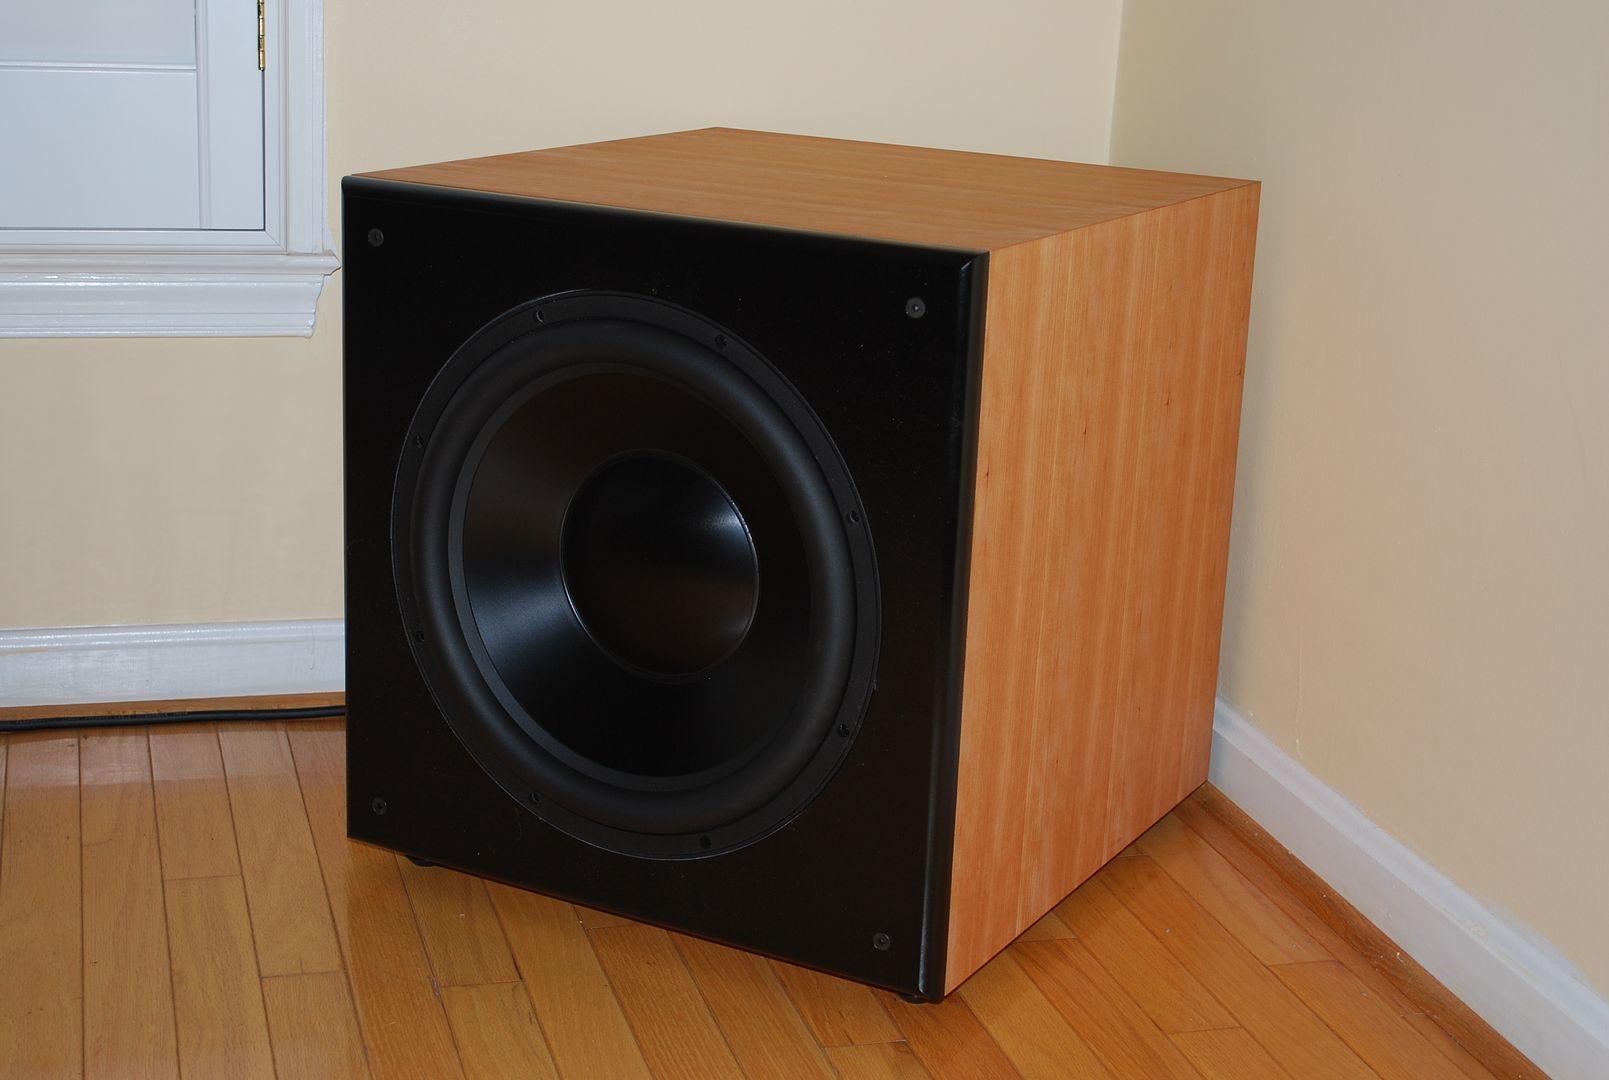 How To Build A Home Theater Powered Subwoofer - Unconventional But